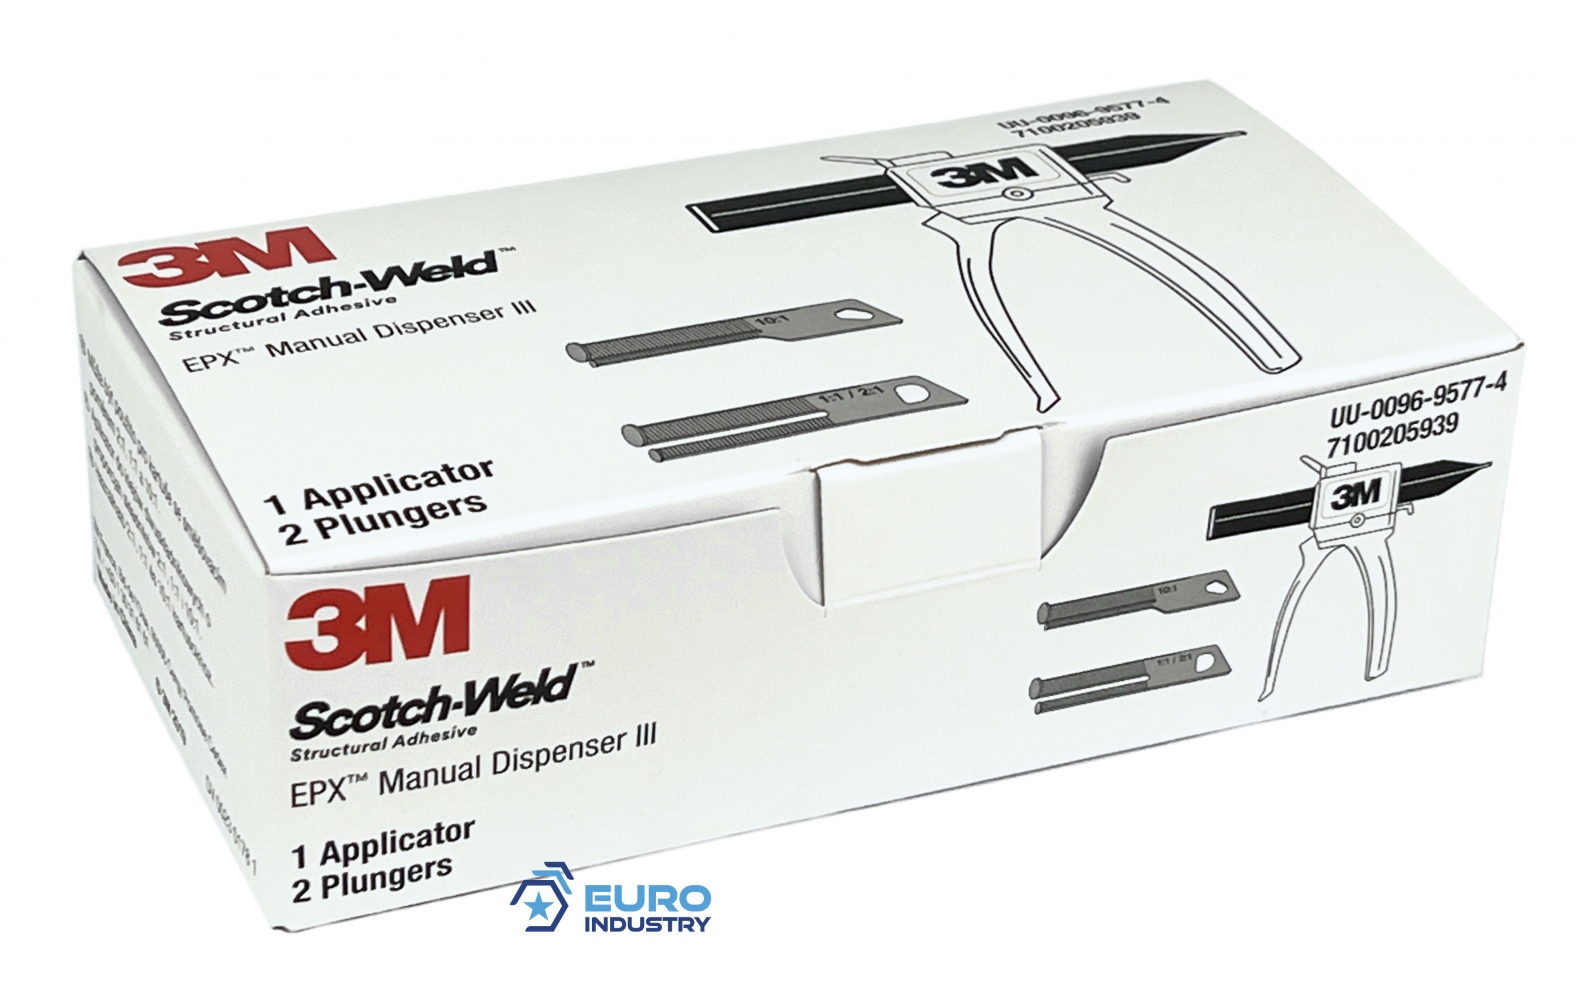 pics/3M/scotch-weld/3m-scotch-weld-epx-manual-dispenser-iii-applicator-for-2c-cartridges-with-2-plungers-packaging-l.jpg